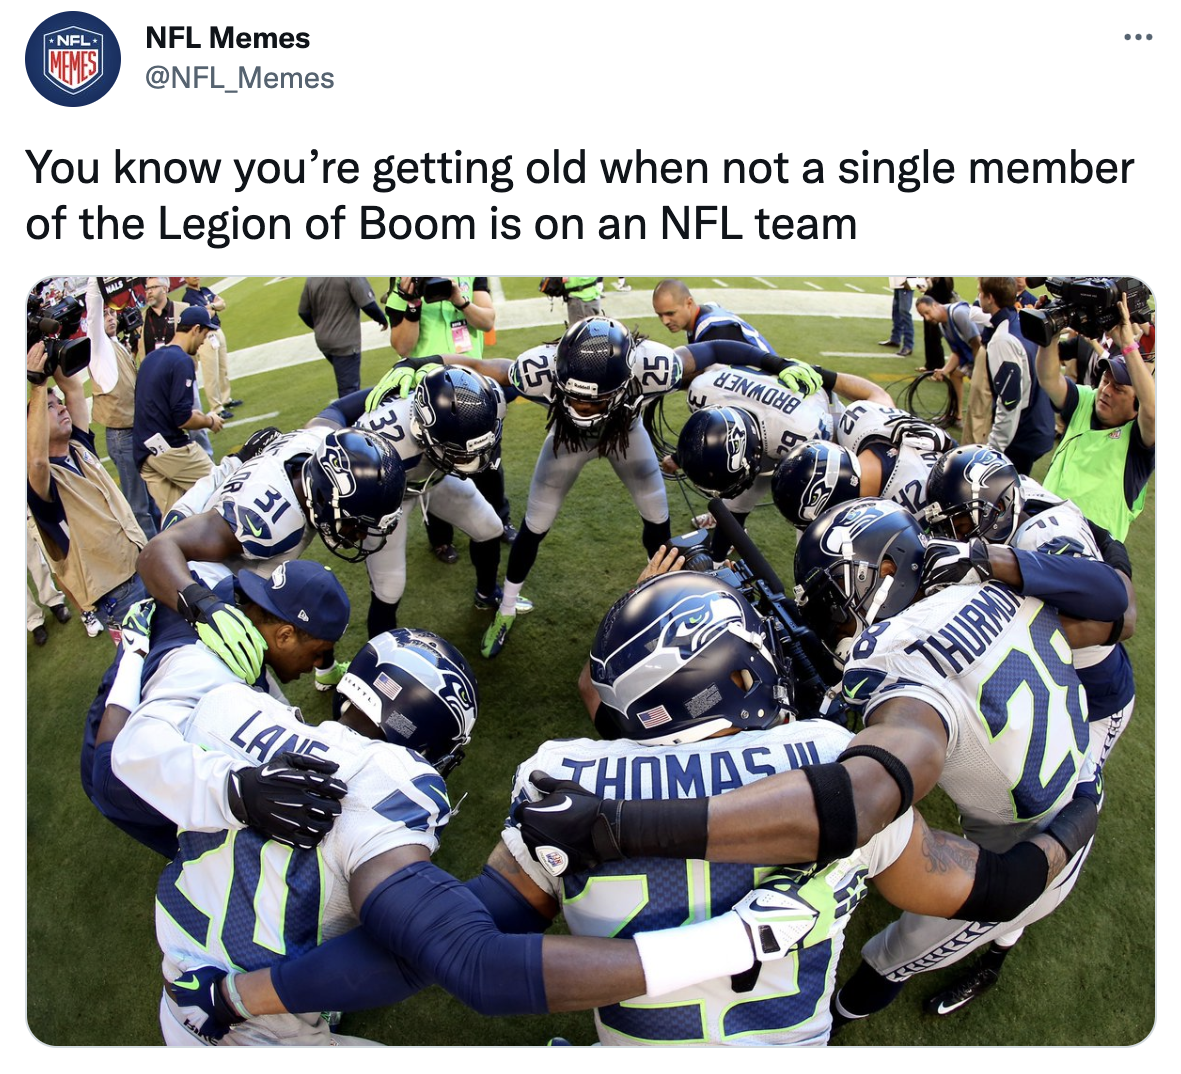 NFL Memes Preseason Roundup - seattle seahawks legion of boom - Nfi Nfl Memes You know you're getting old when not a single member of the Legion of Boom is on an Nfl team Lan Kenmore Thomas Thurmo The Treater & 82